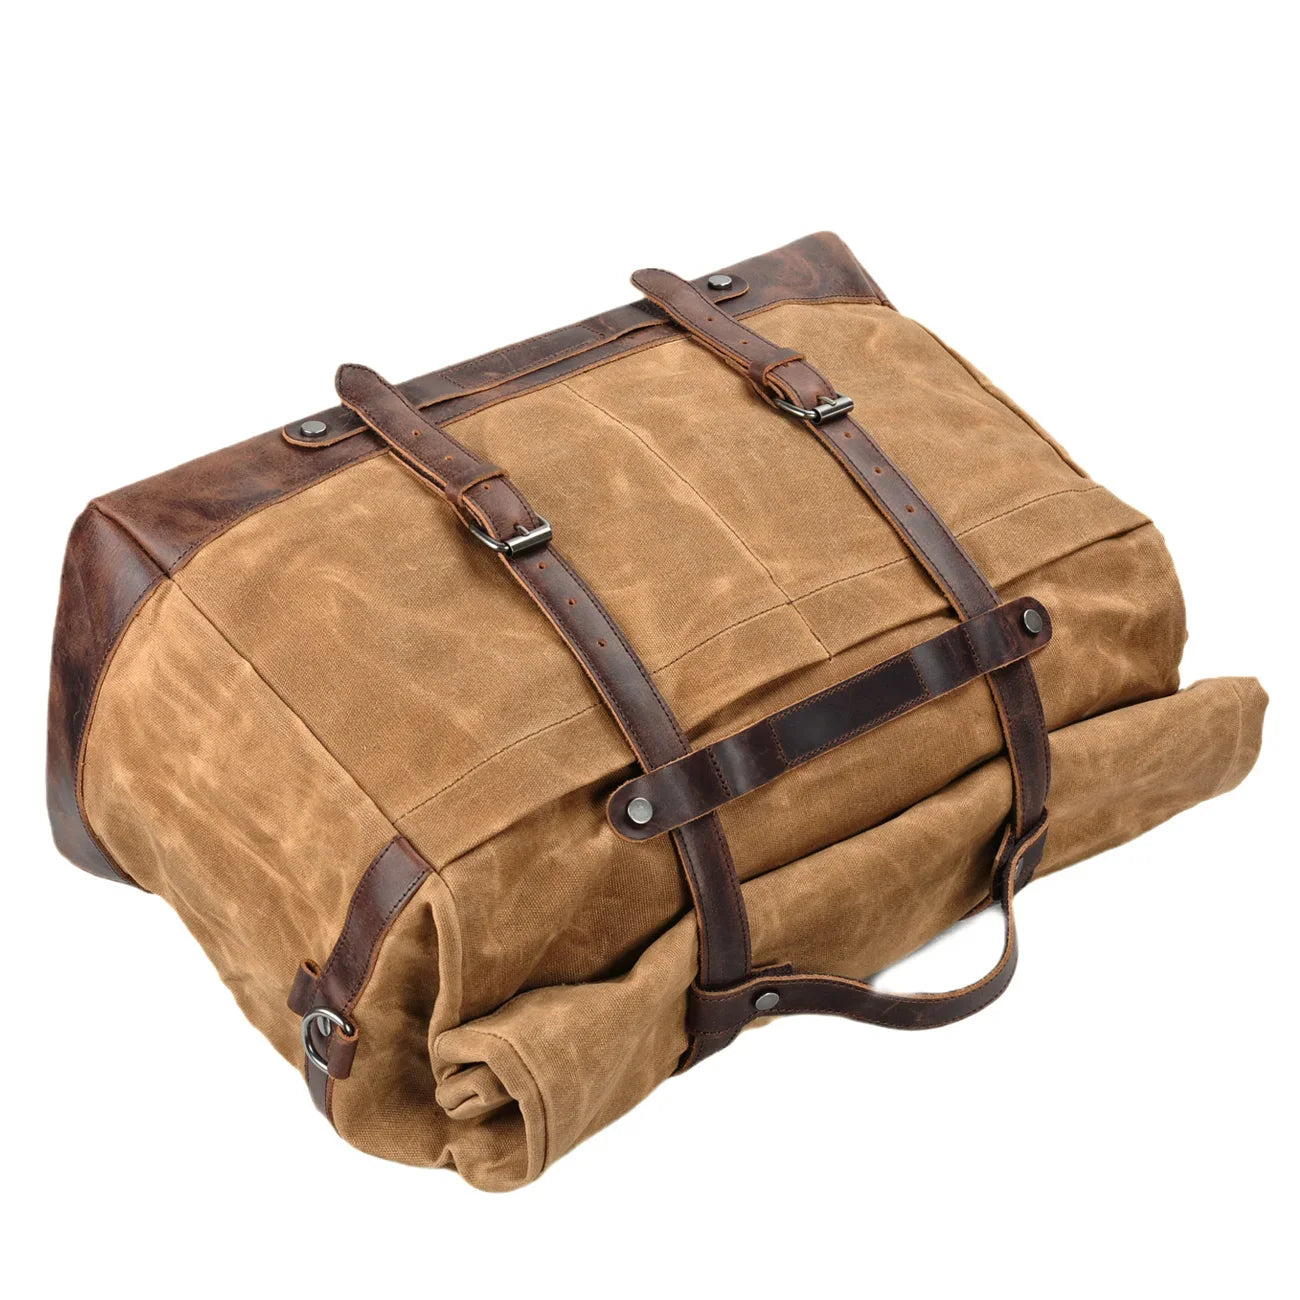 American Trail Waxed Canvas Large Capacity Rugged Explorer Travel Bag